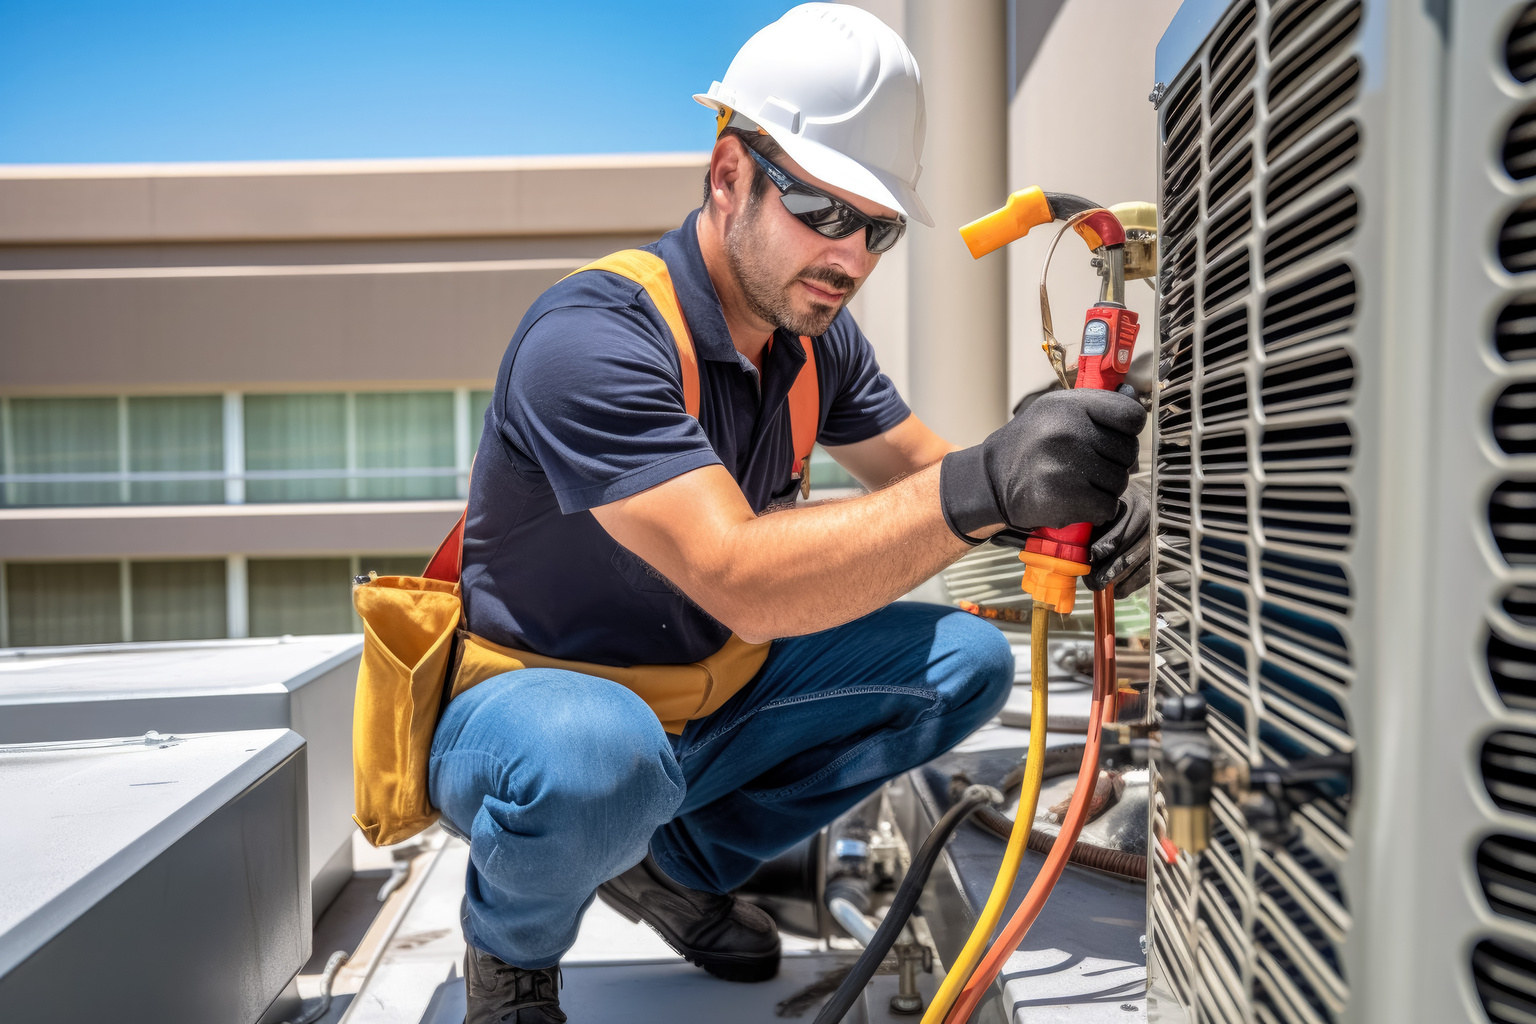 Technician working on air conditioning outdoor unit on hot sunny day